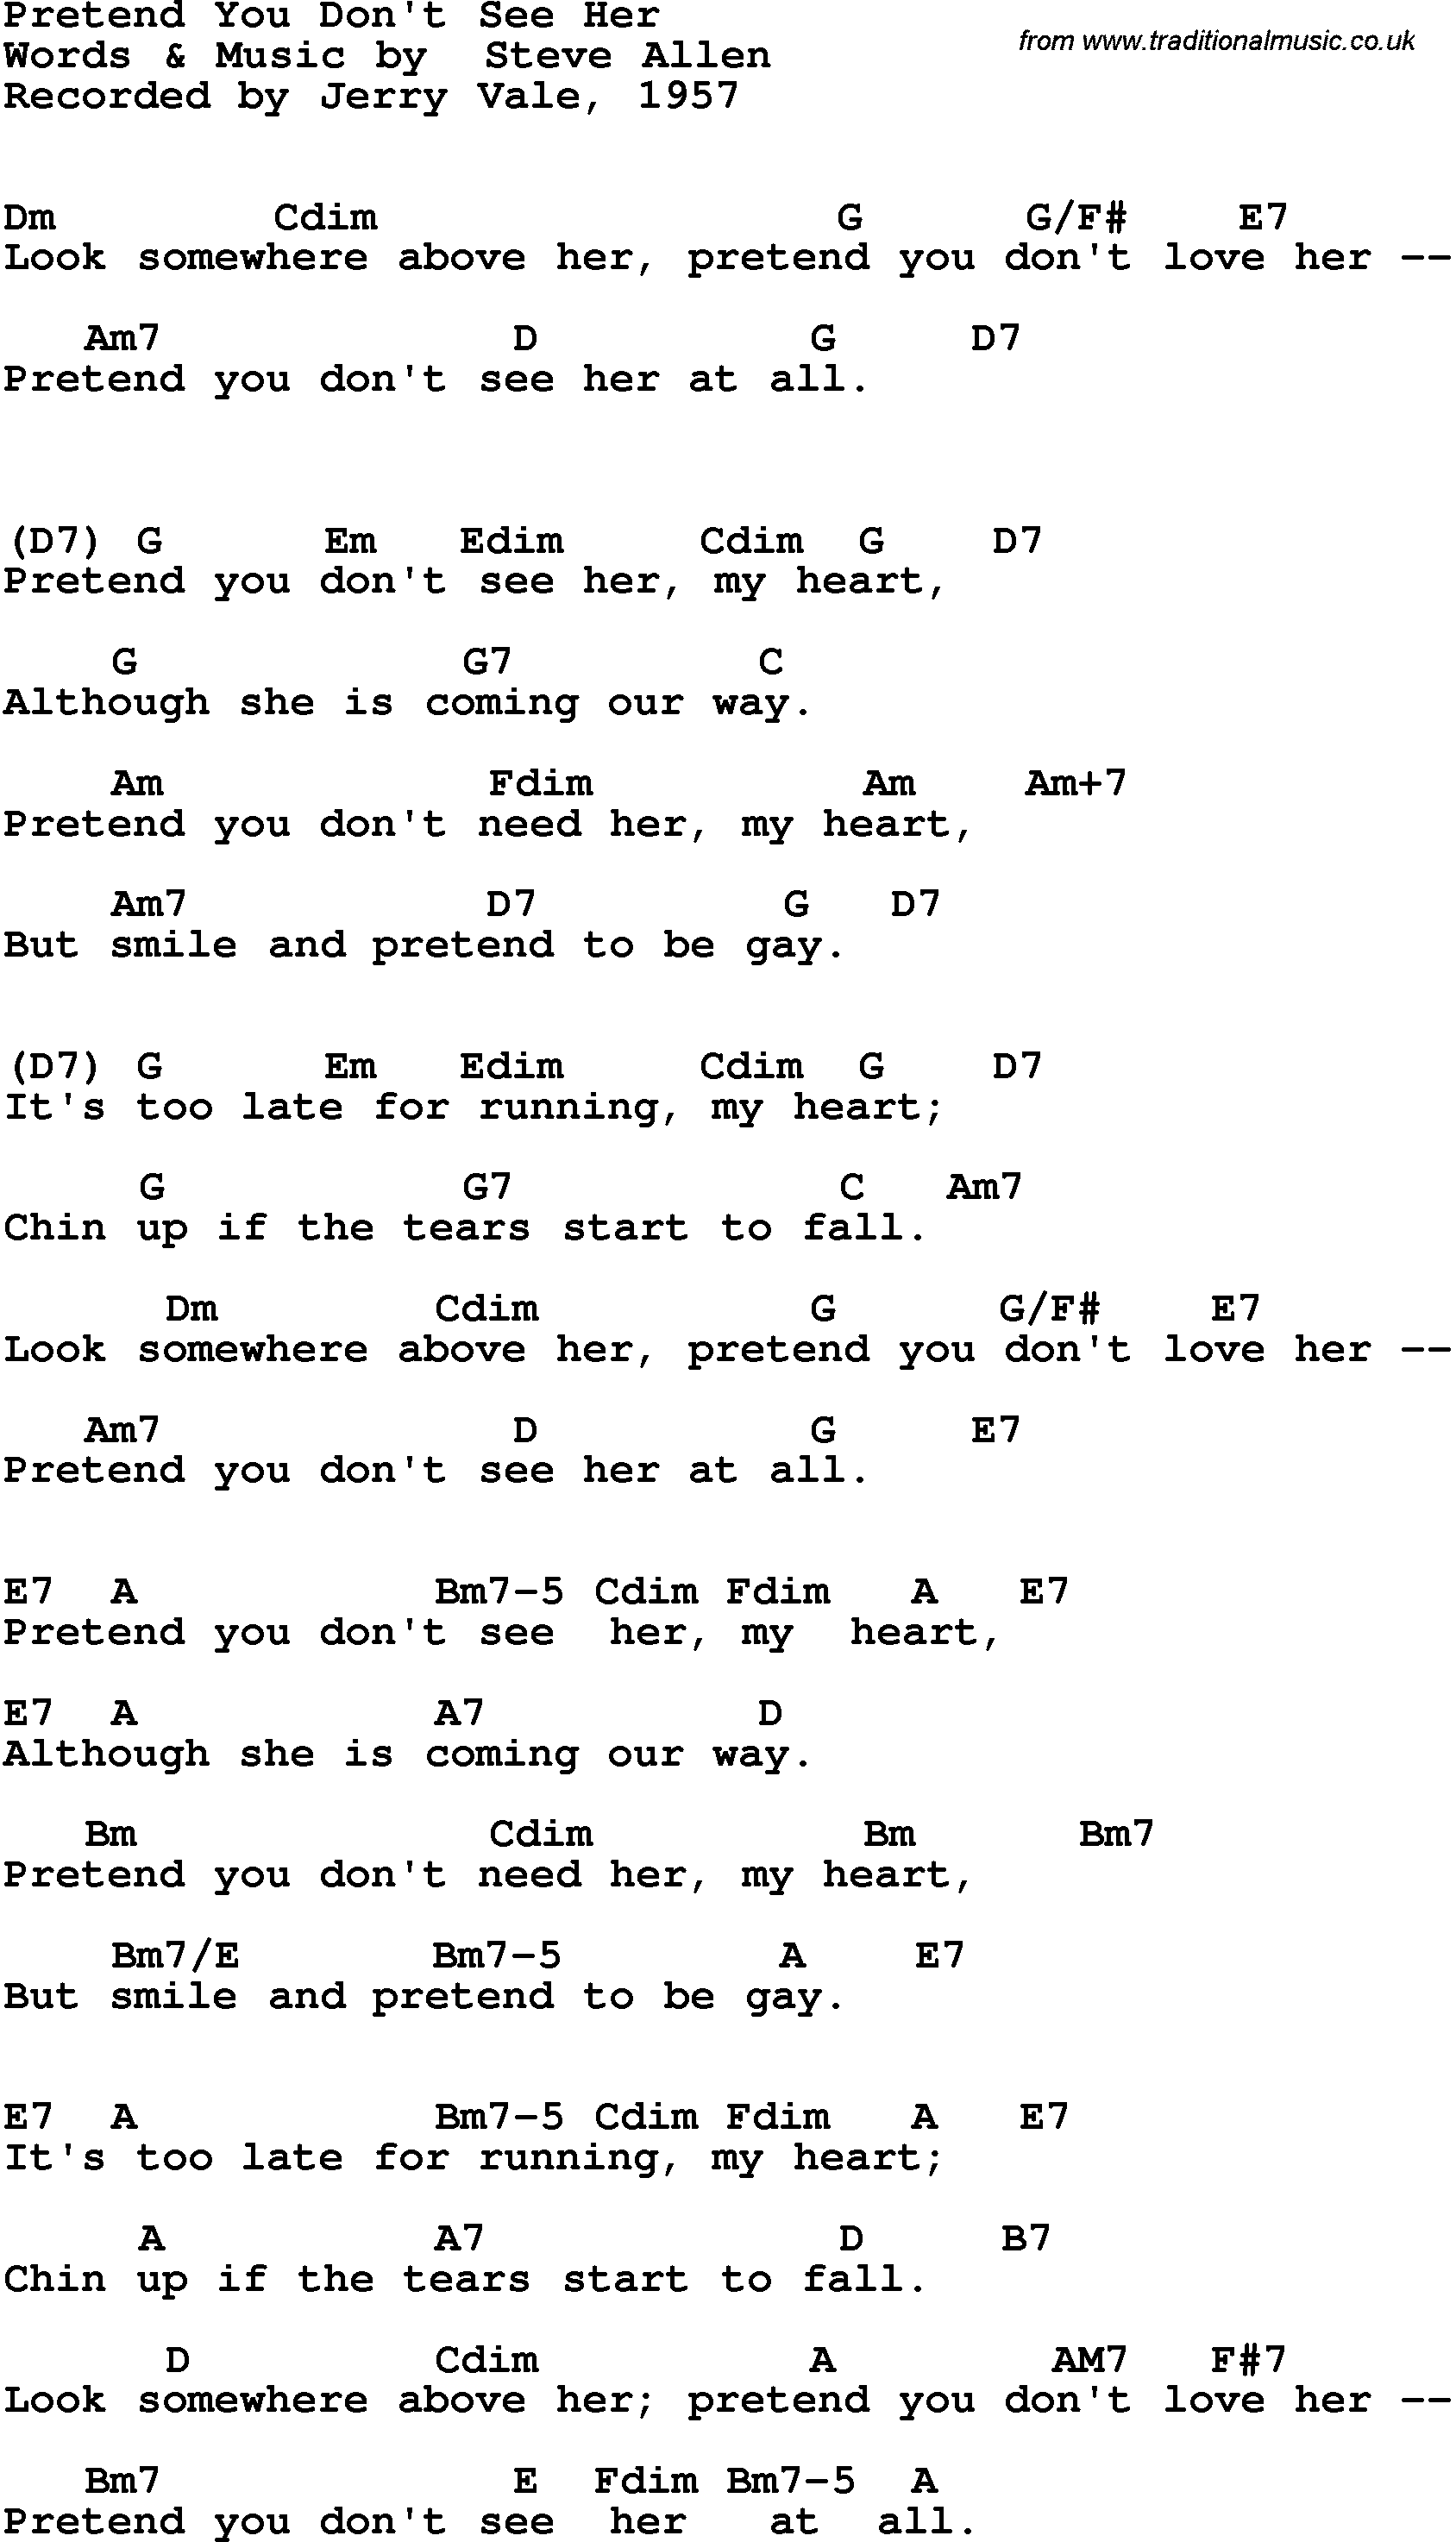 Song Lyrics with guitar chords for Pretend You Don't See Her - Jerry Vale, 1957